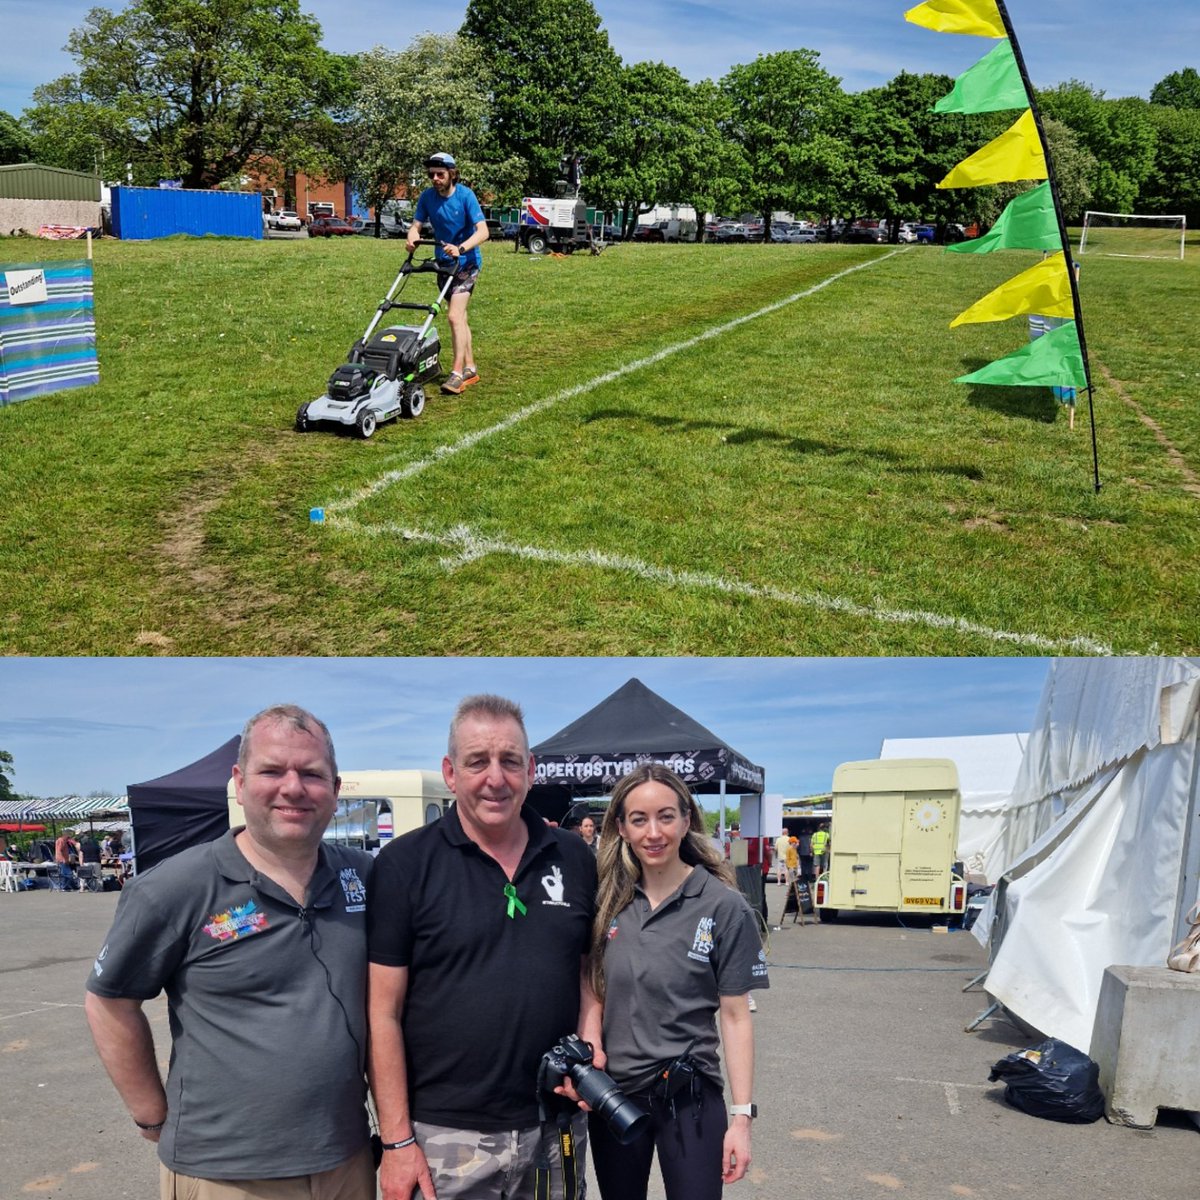 Huge congratulations to James Barlow on covering over 80 miles in 24 hours pushing a lawn mower beating the @GWR Guinness World Record! An epic achievement to raise awareness and funds for @andysmanclubuk Macclesfield #ITSOKAYTOTALK @MaccRoundTable @MaccRugby